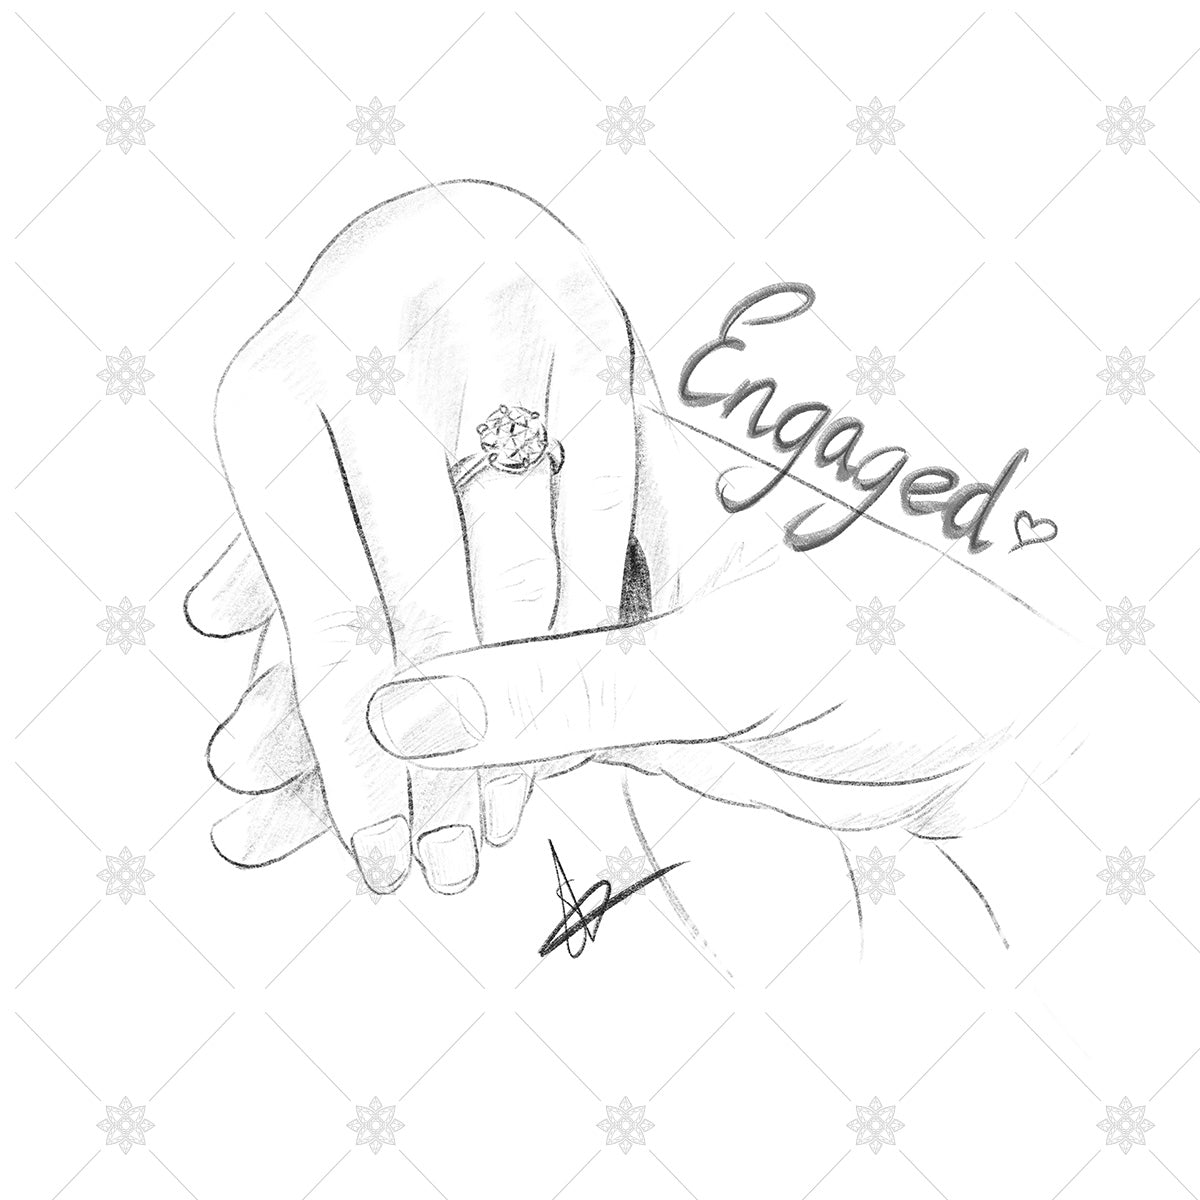 Holding Hands Pencil Sketch Engaged - SK1028 – JEWELLERY:GRAPHICS